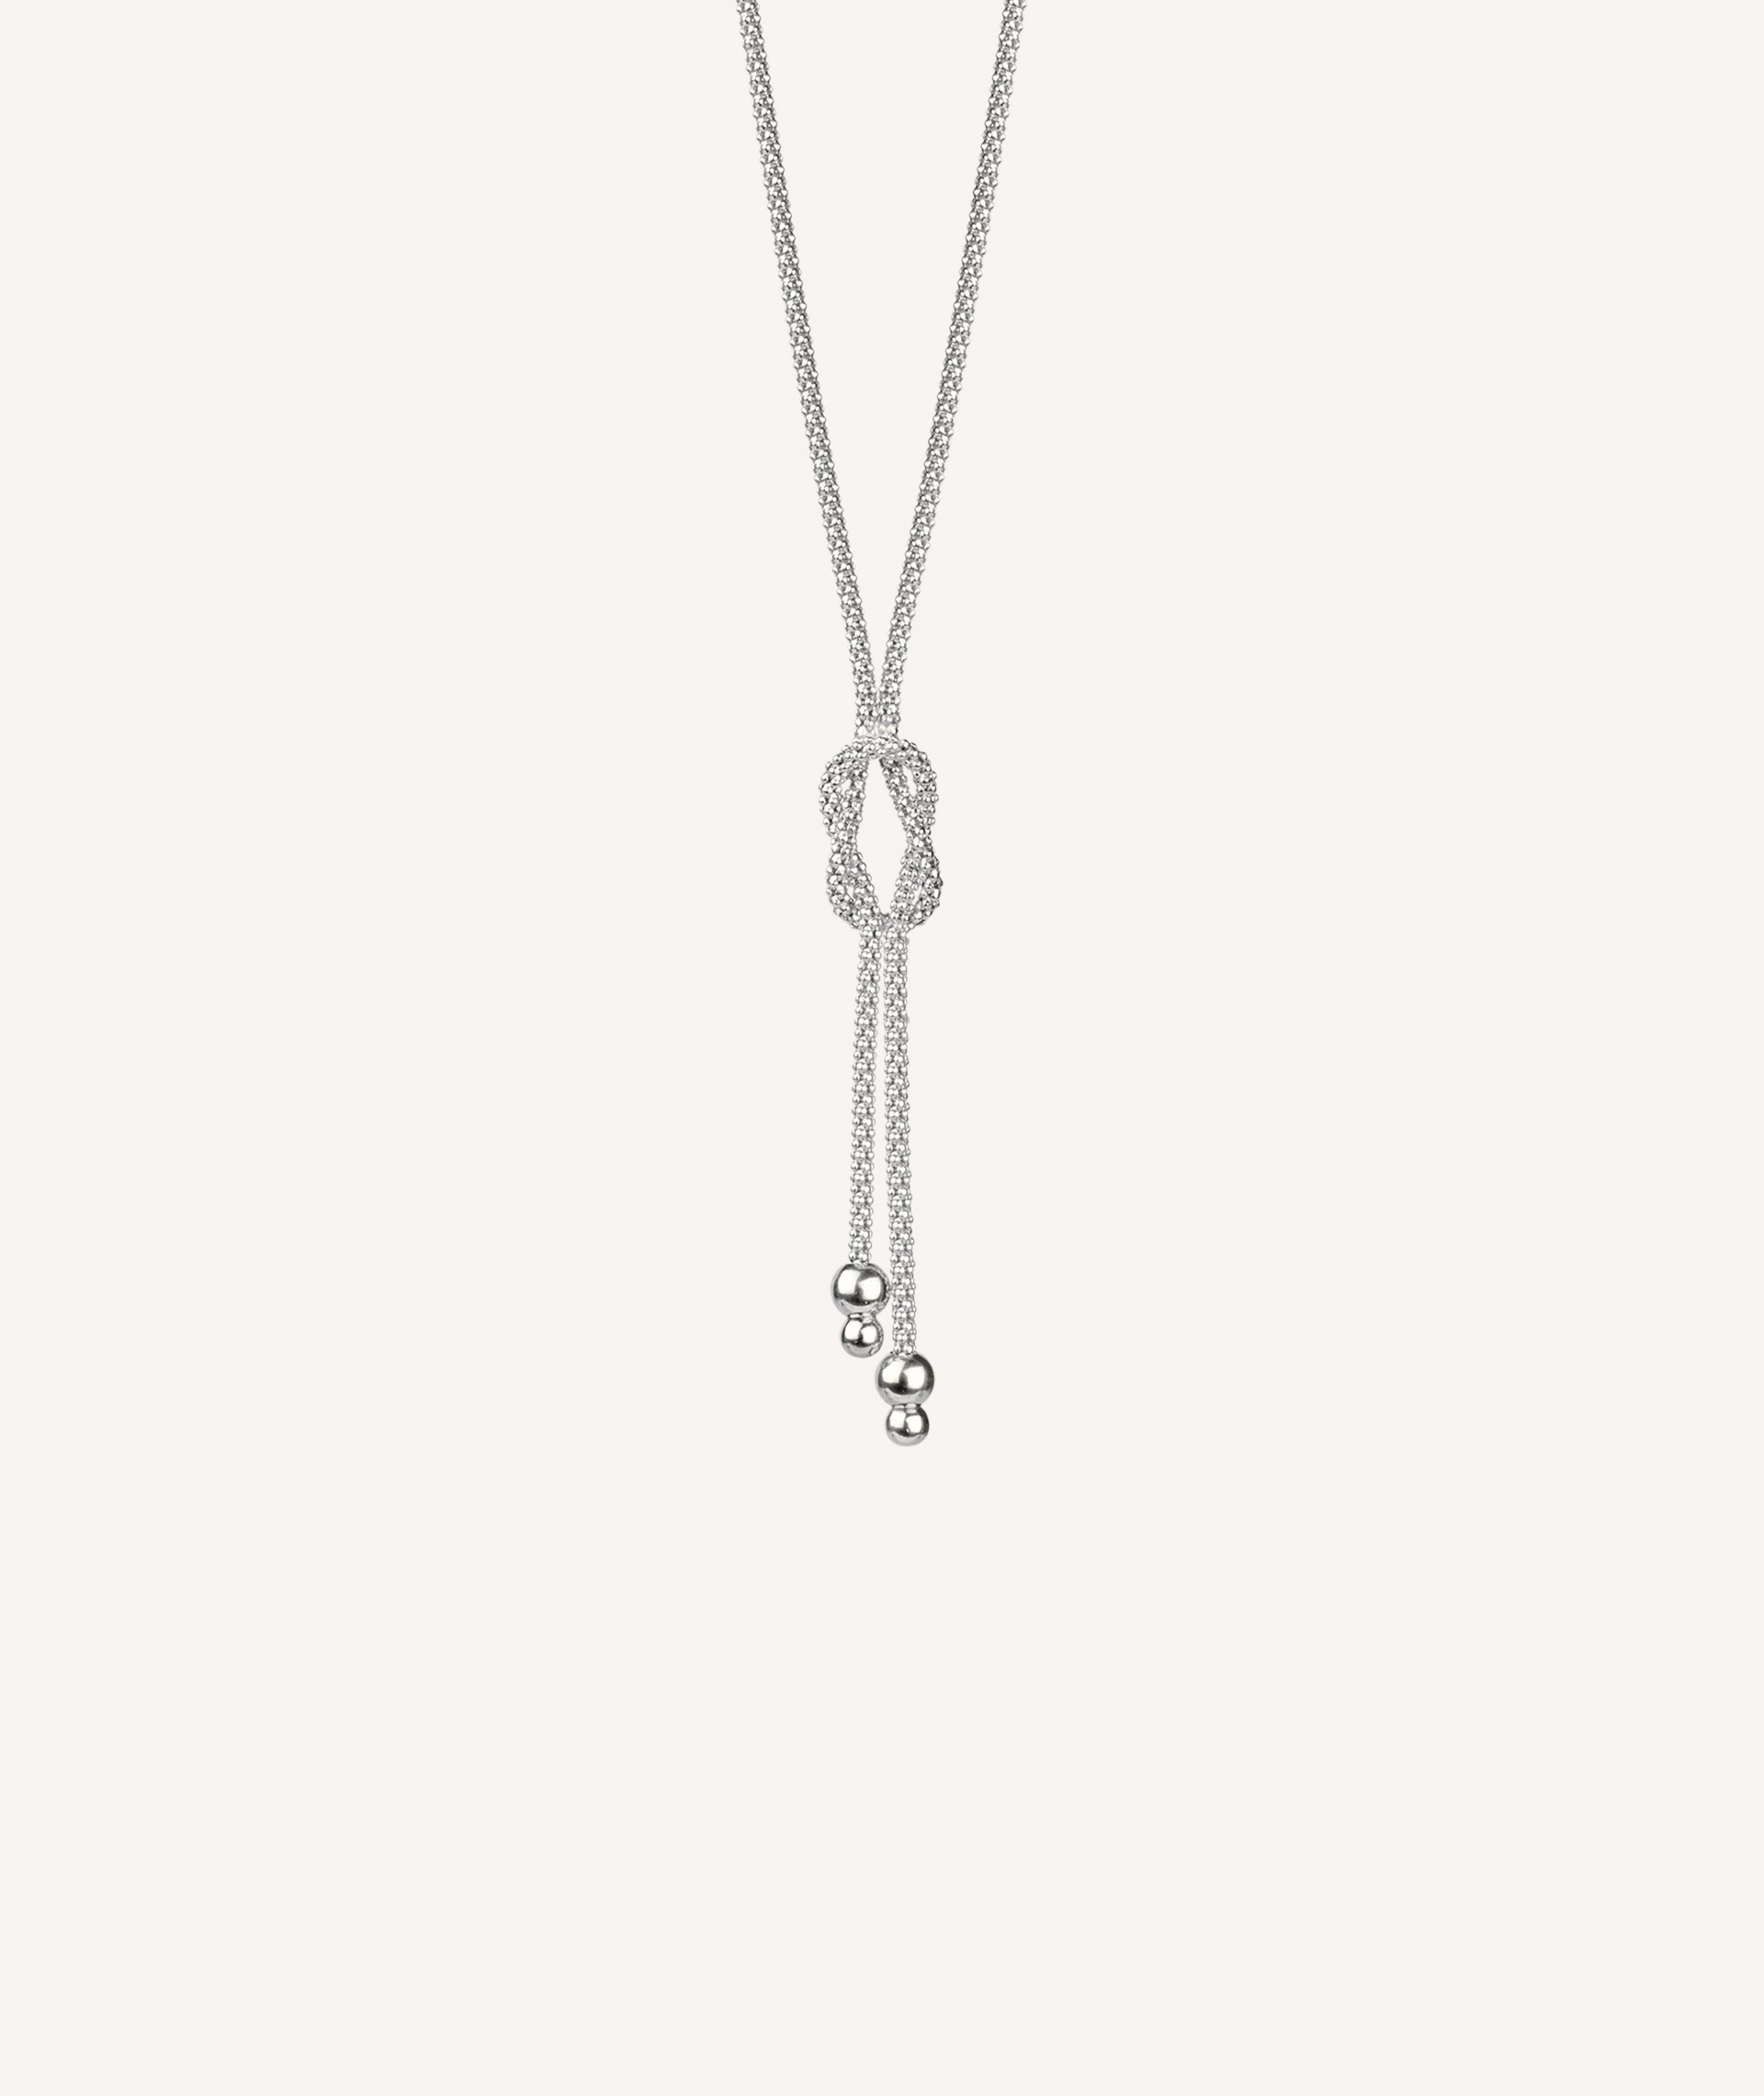 Necklace Knot